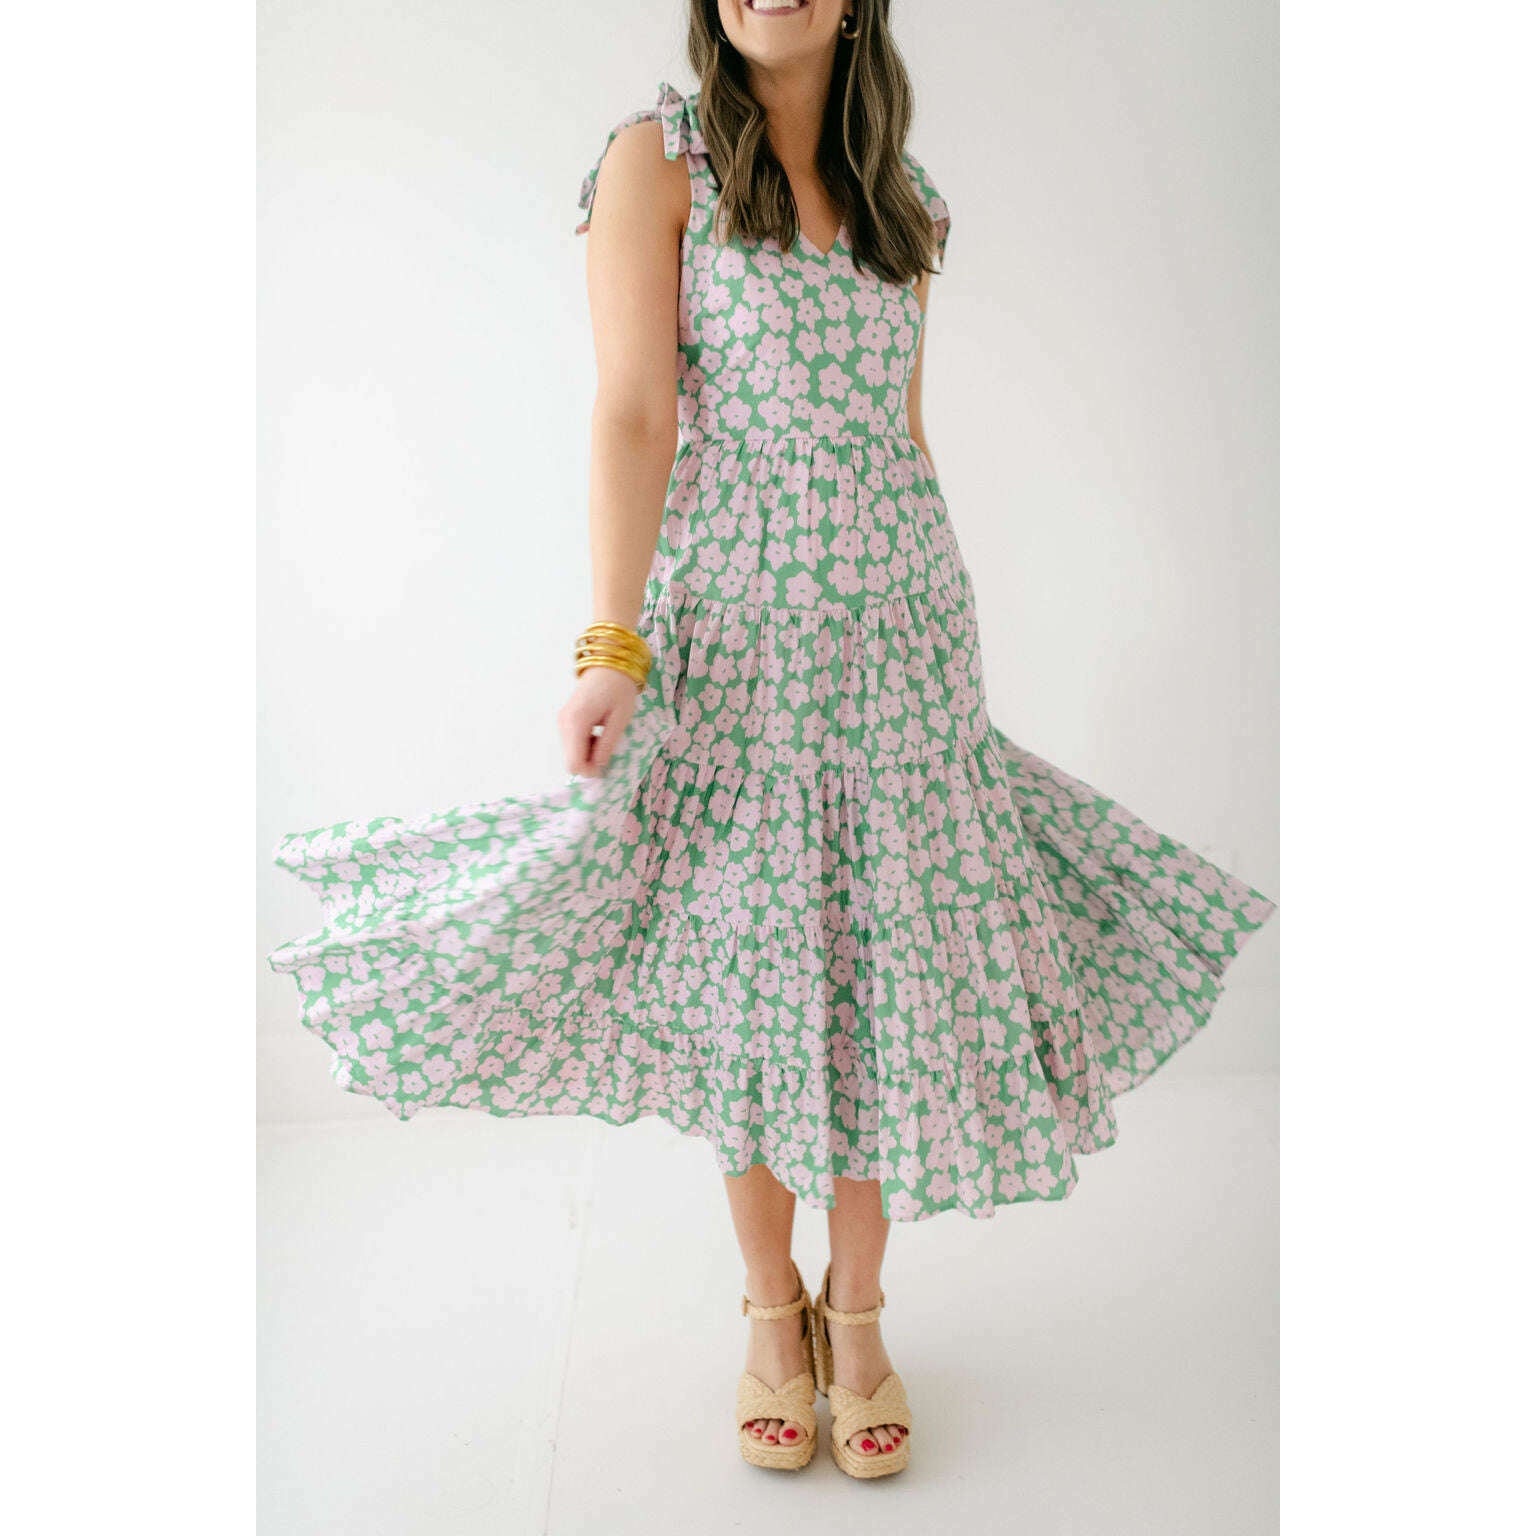 8.28 Boutique:8.28 Boutique,The Victoria Pink and Green Poppy Midi Dress,Dress